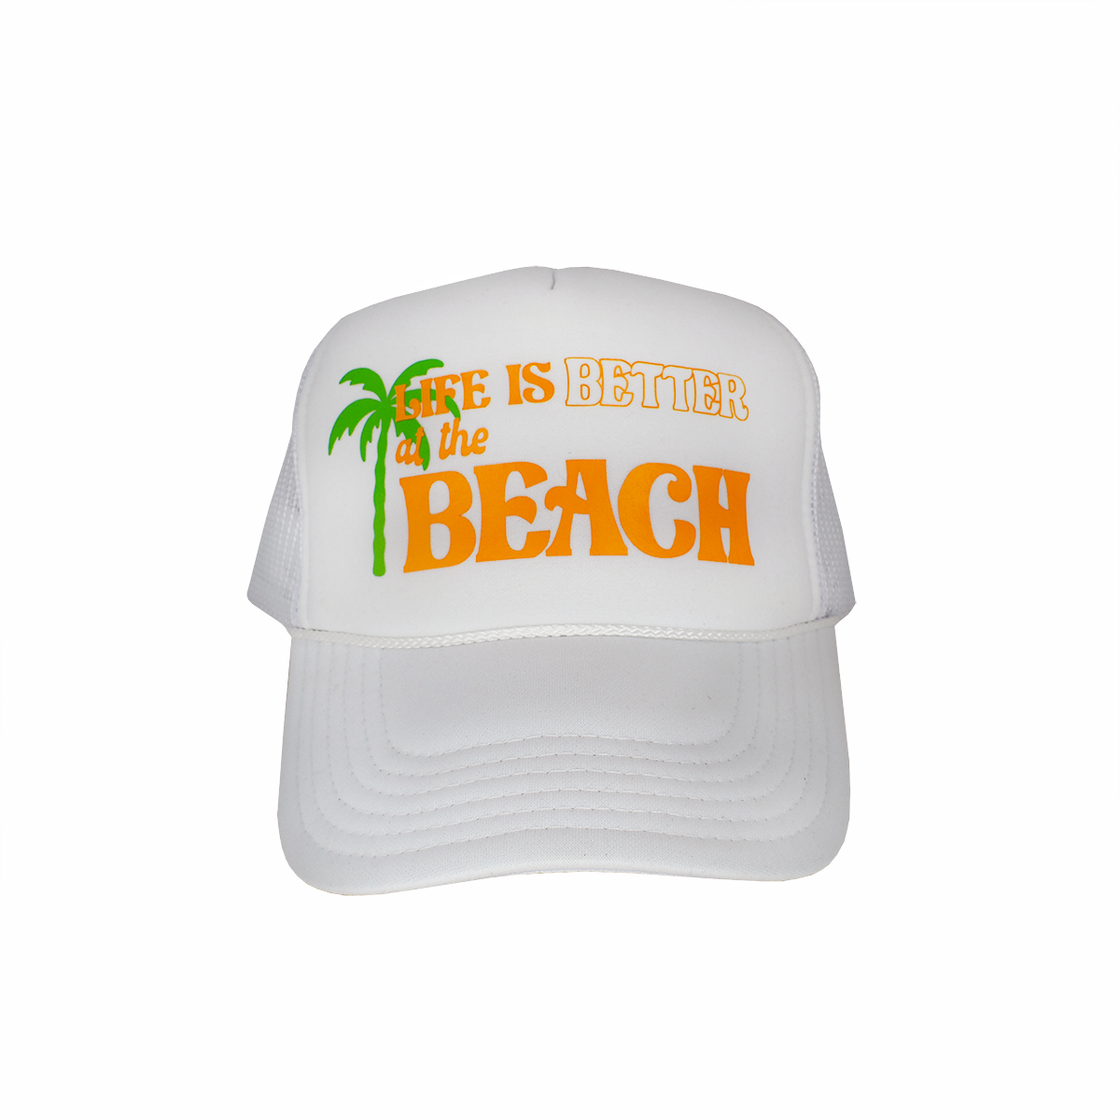 “Life is Better at the Beach” Trucker Hat